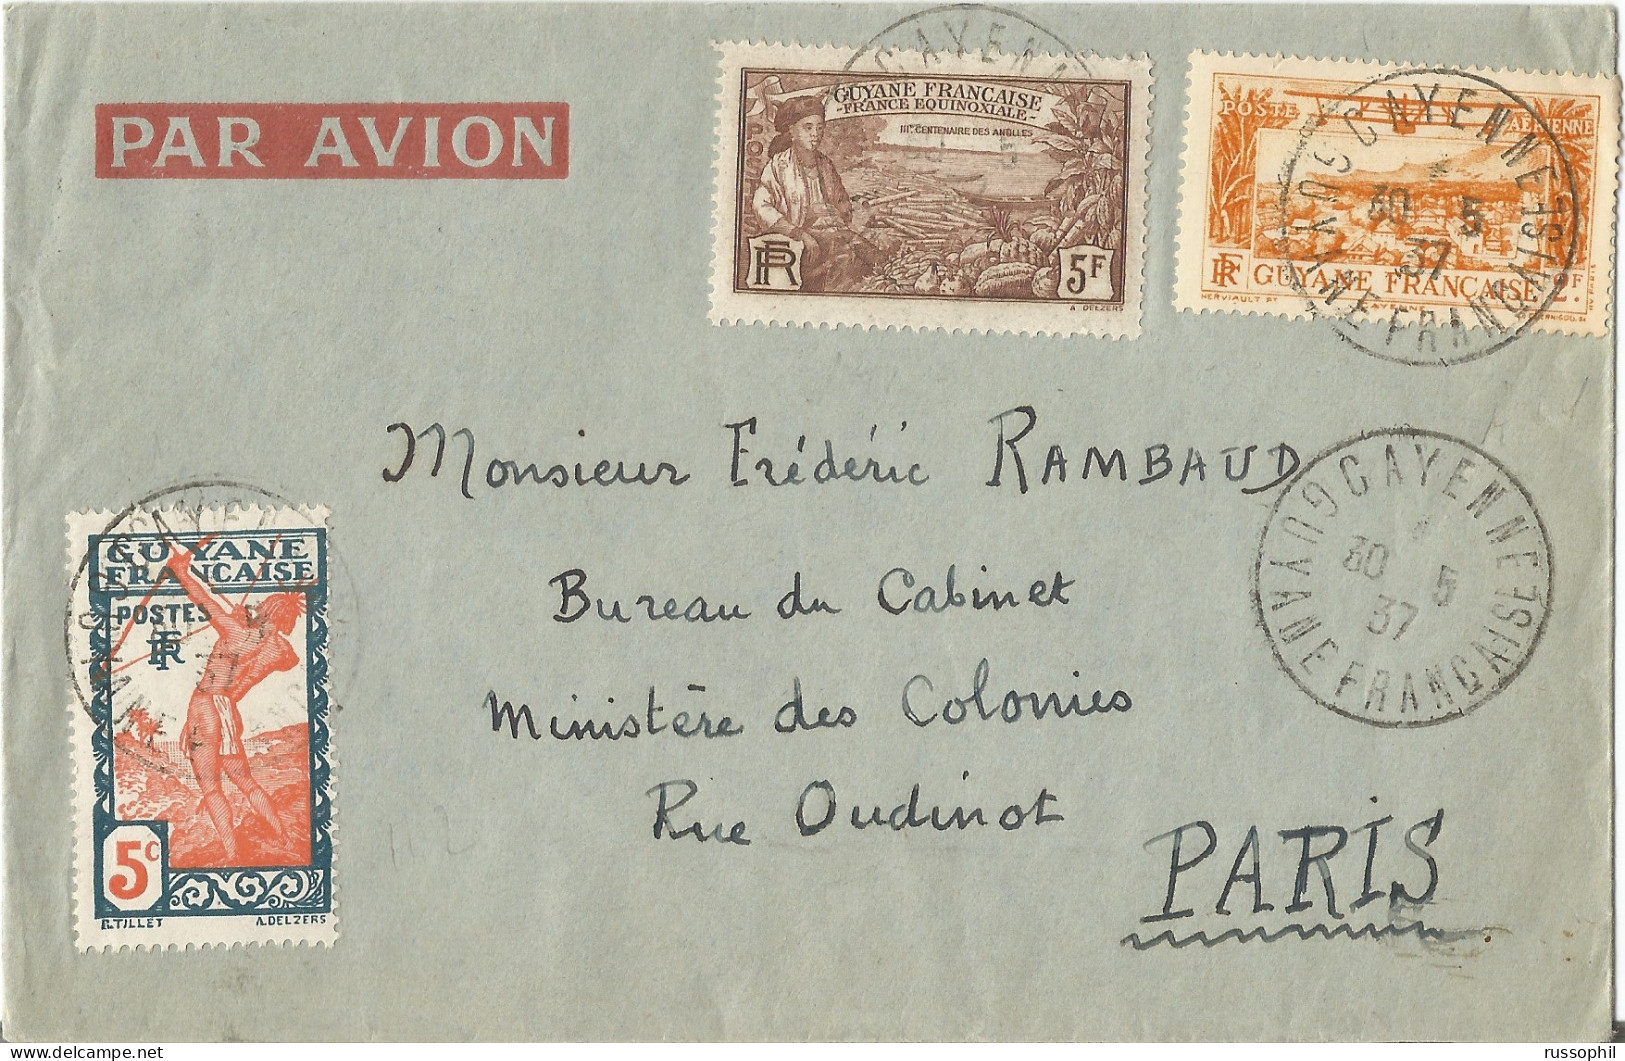 GUYANE - 7 FR.  5 CENT. FRANKING ON AIR MAILED COVER FROM CAYENNE TO FRANCE - 1937 - Lettres & Documents